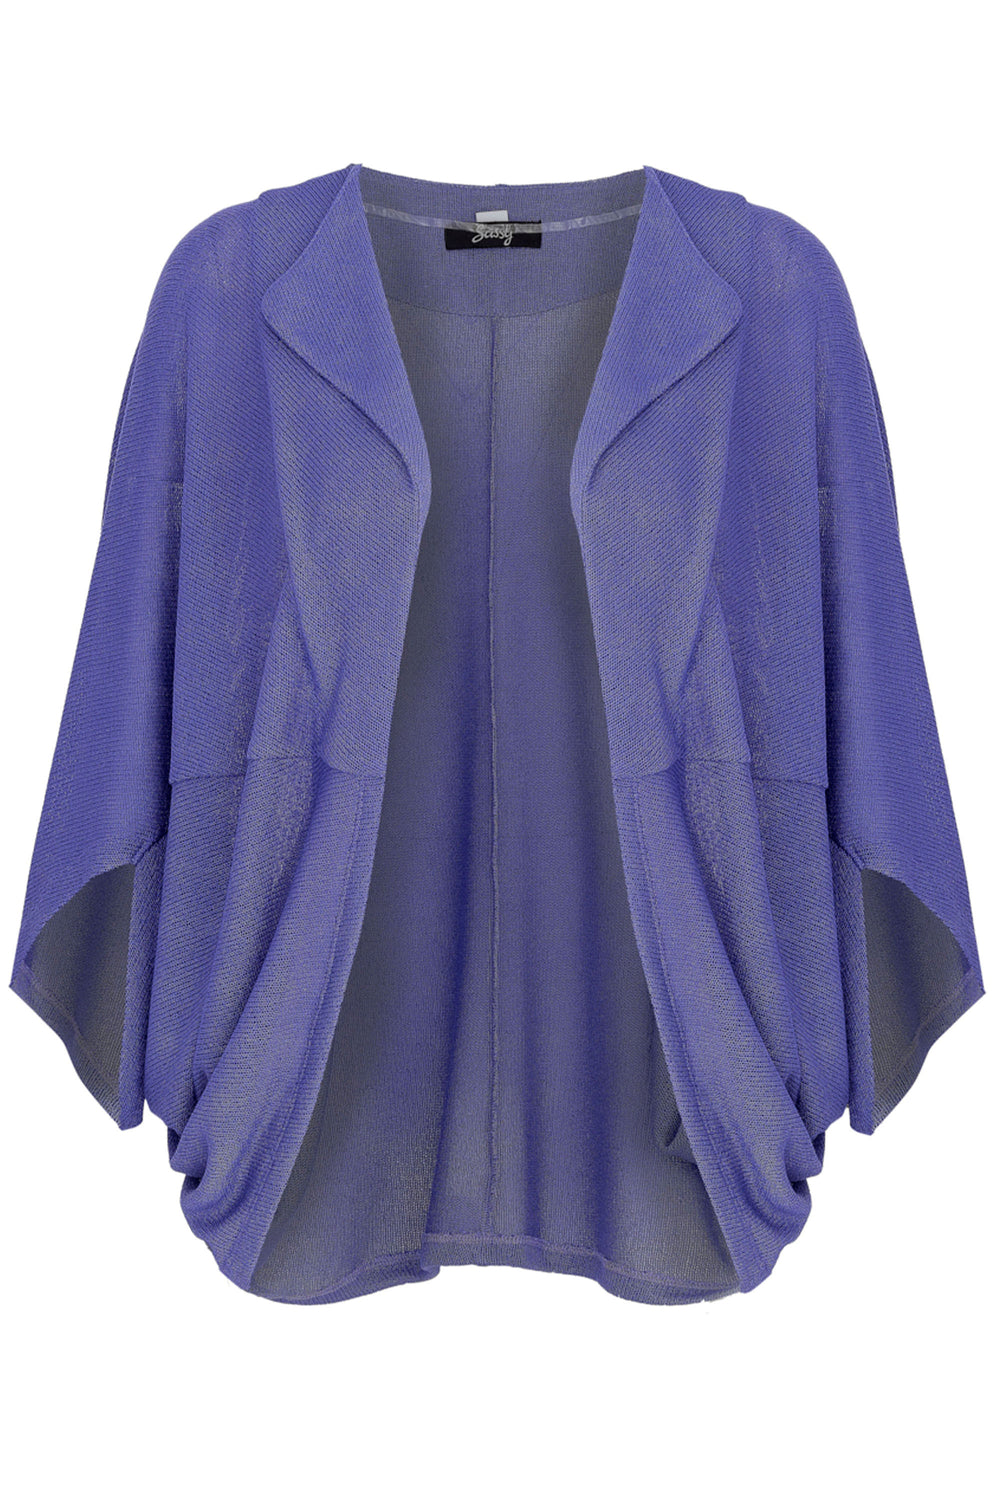 EVER SASSY Spring 2024 This Touch Of Nature Cardigan is made of free flowing, light and wavy viscose fabric, perfect for capris and crop pants. Its loose, relaxed fit drapes gracefully for a comfortable, stylish look.